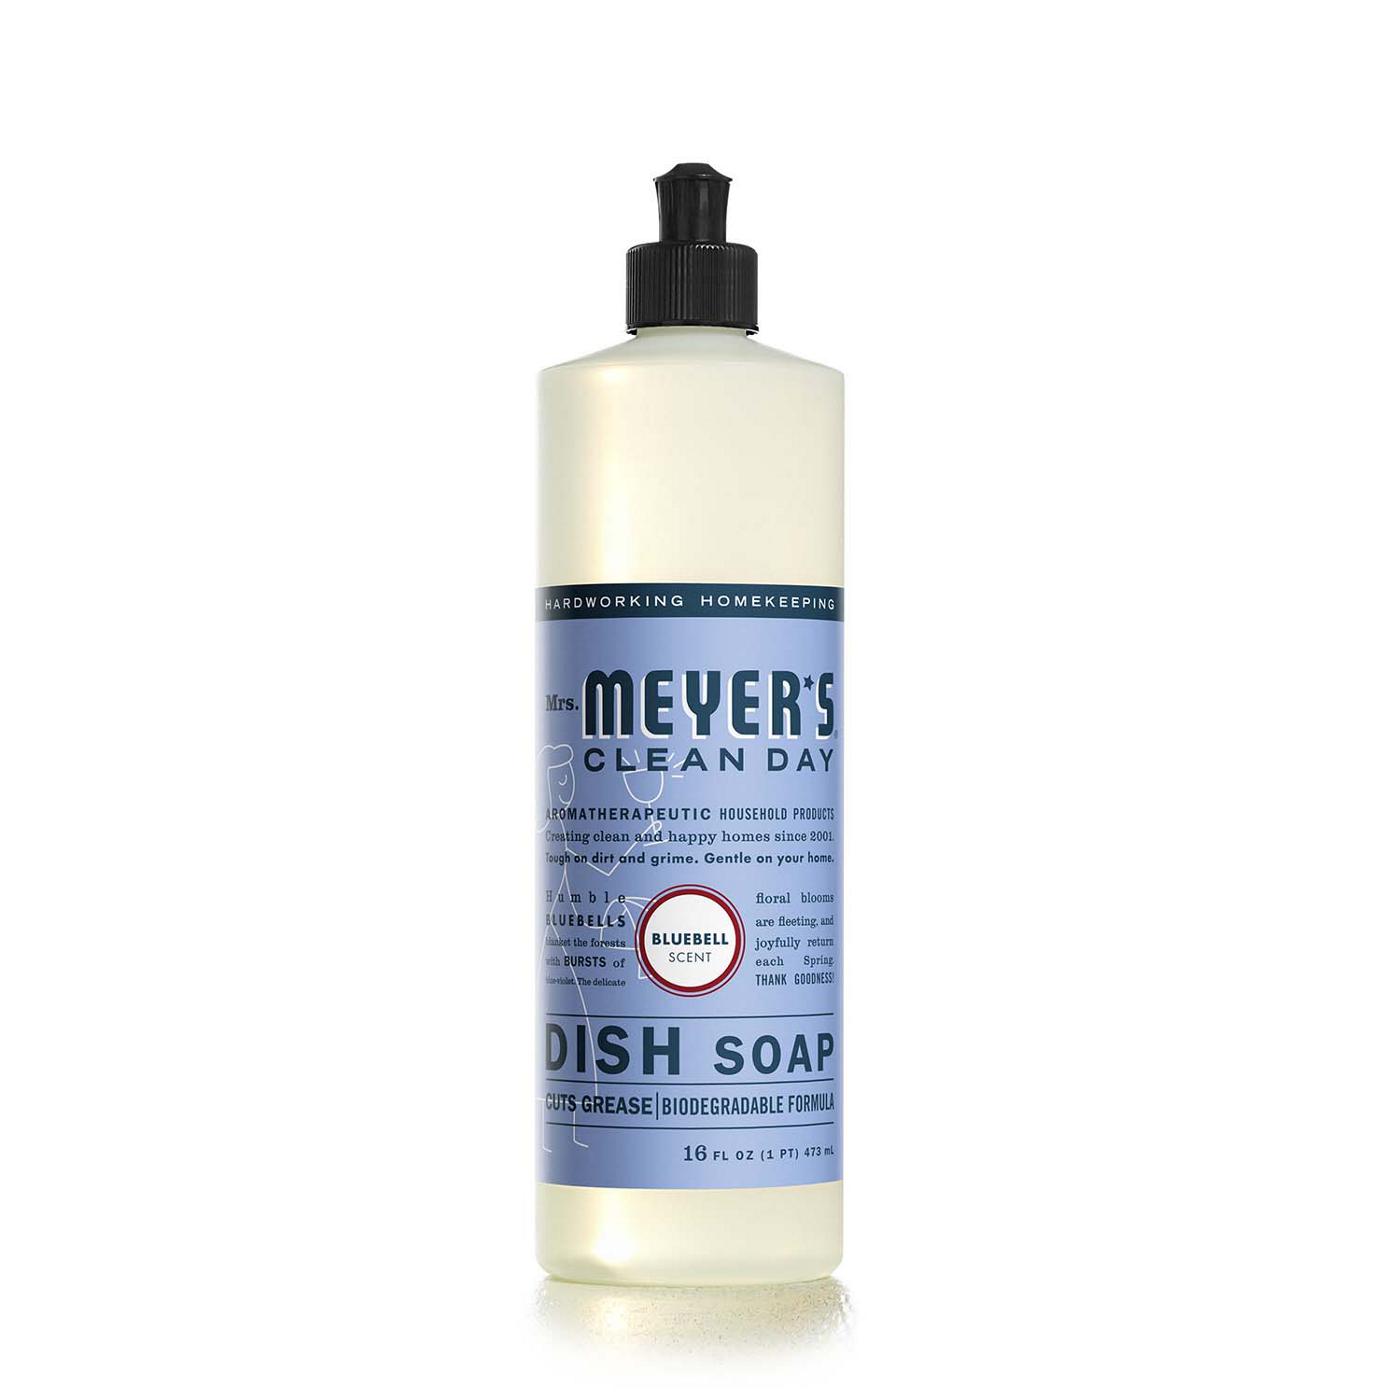 Mrs. Meyer's Clean Day Bluebell Scent Dish Soap; image 1 of 6